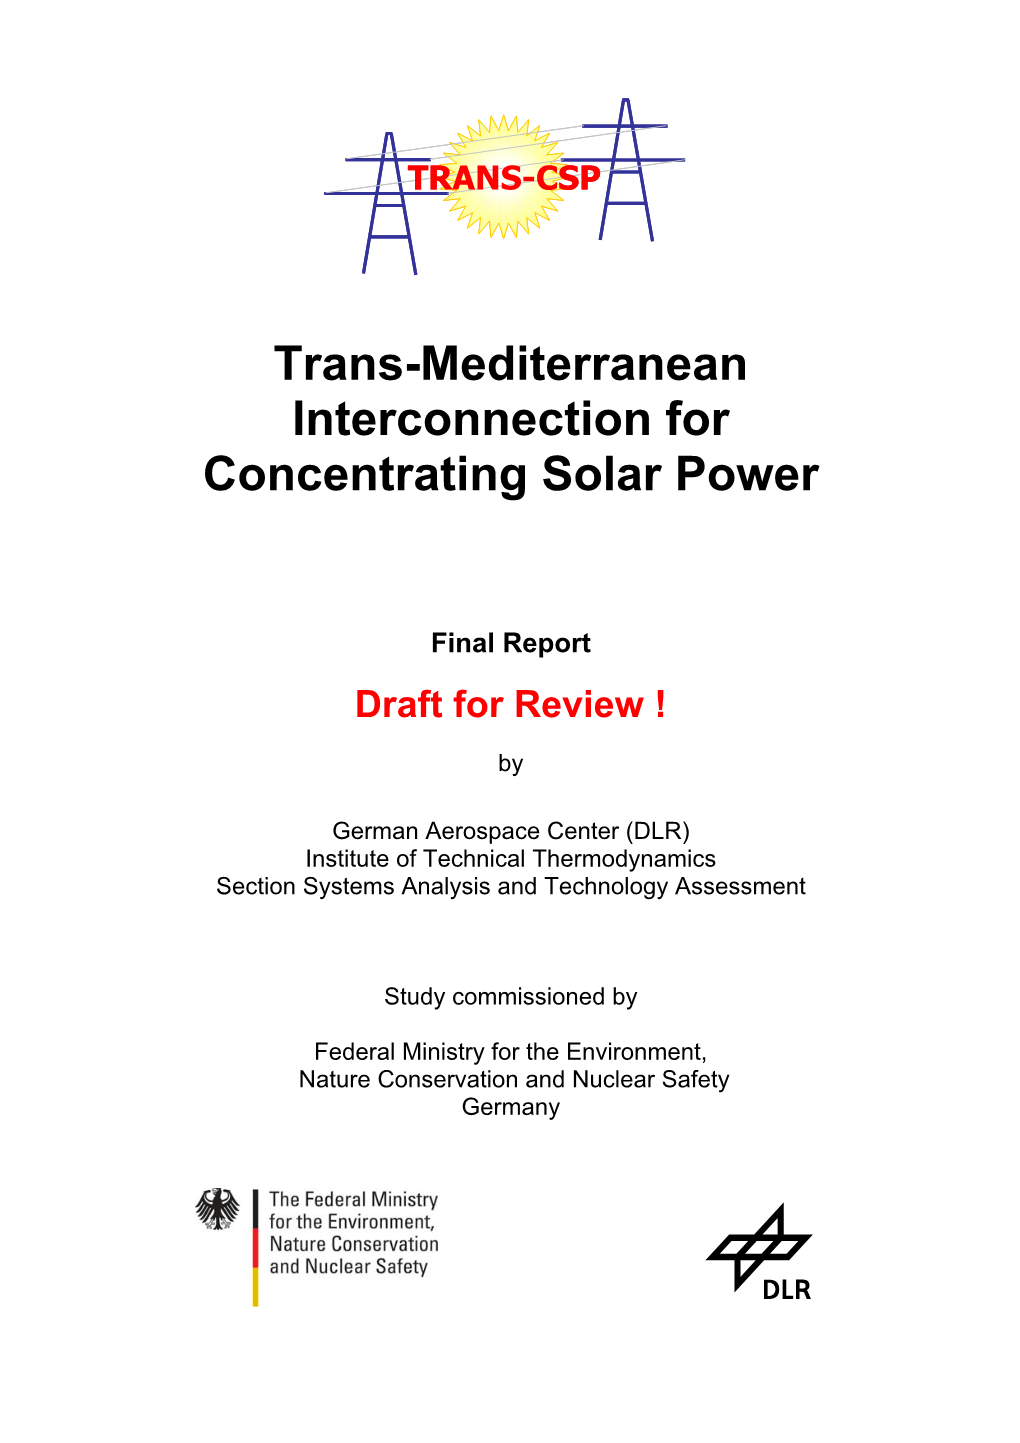 Trans-Mediterranean Interconnection for Concentrating Solar Power